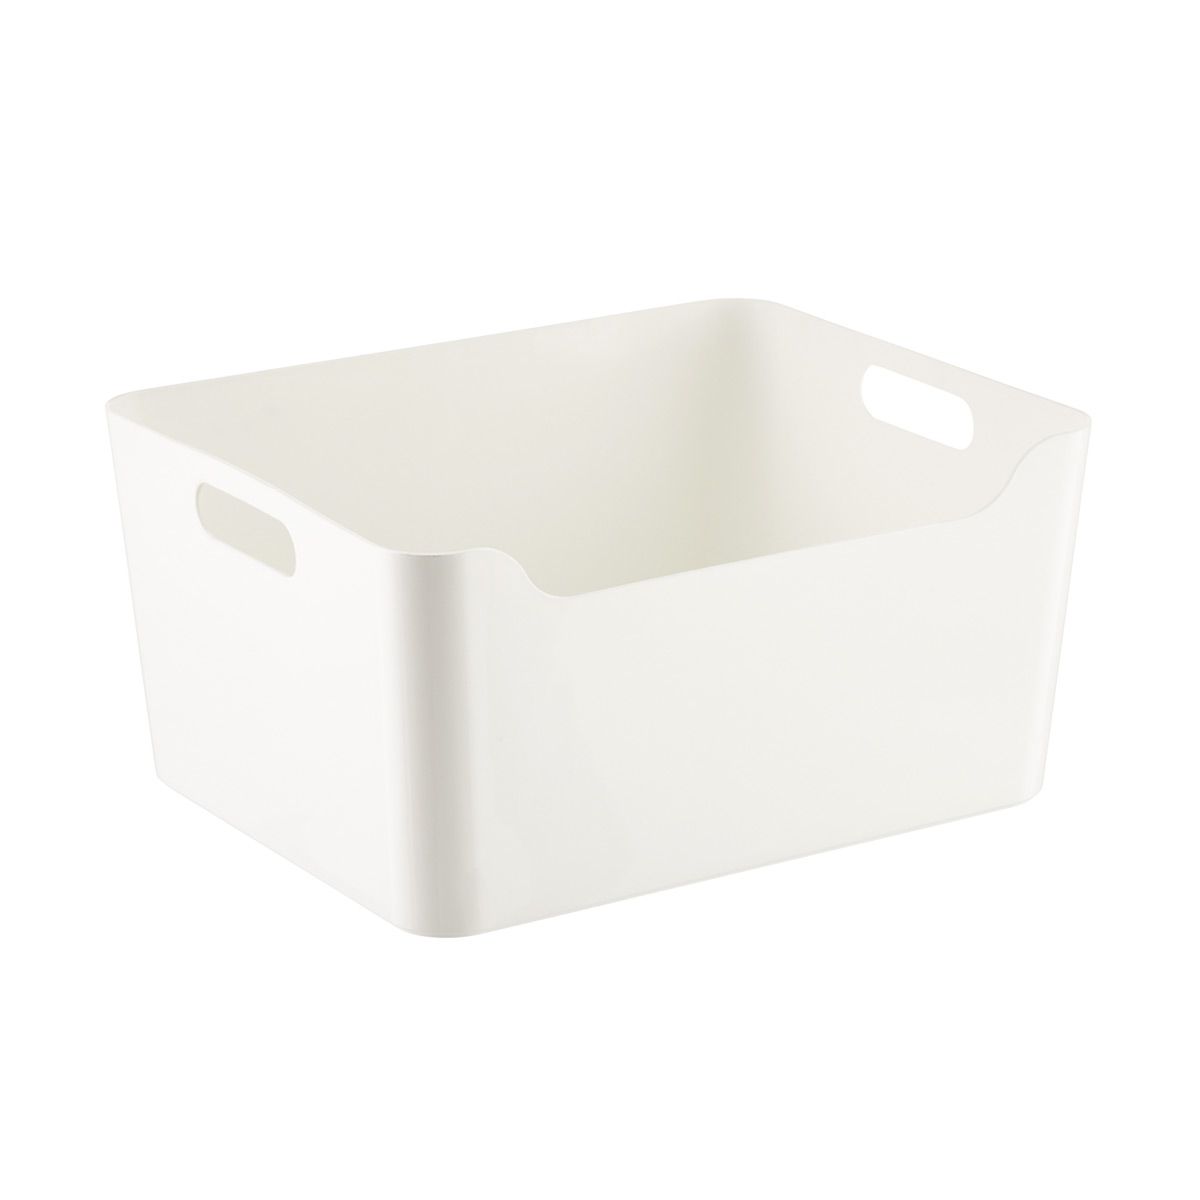 Plastic Storage Bin w/ Handles | The Container Store